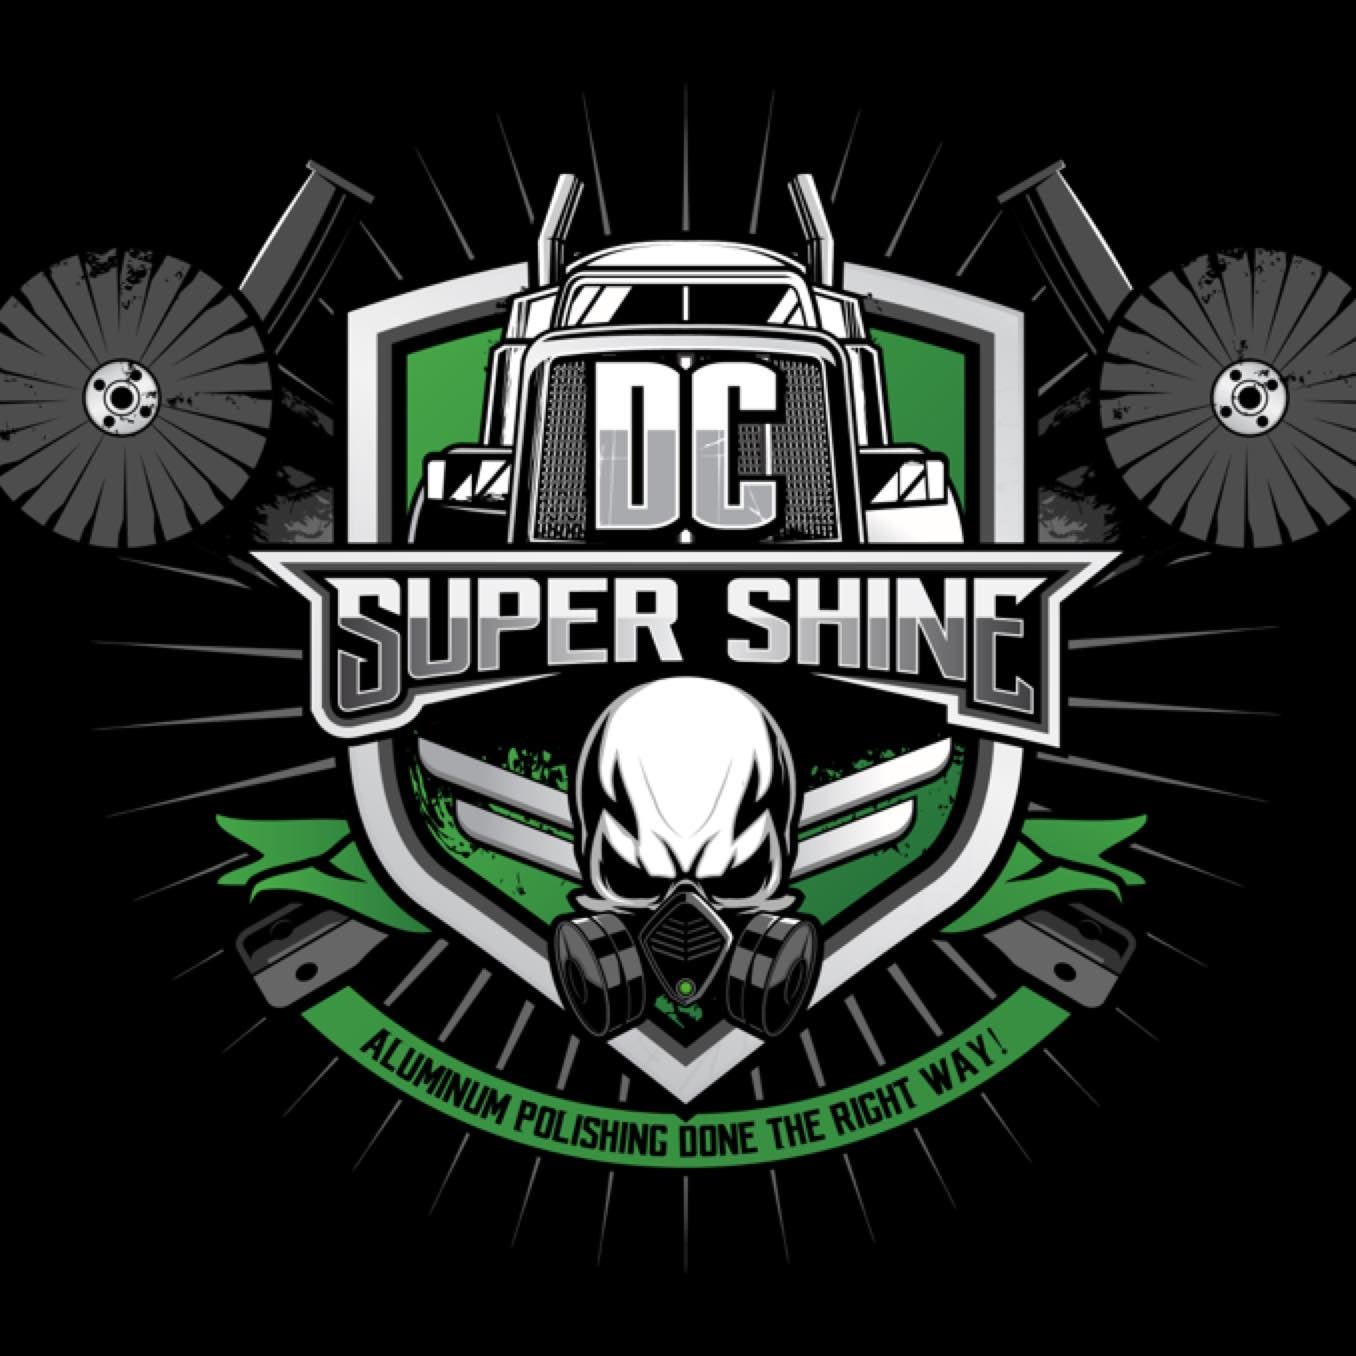 DC Super Shine - How to Polish Aluminum the right way!!! Want